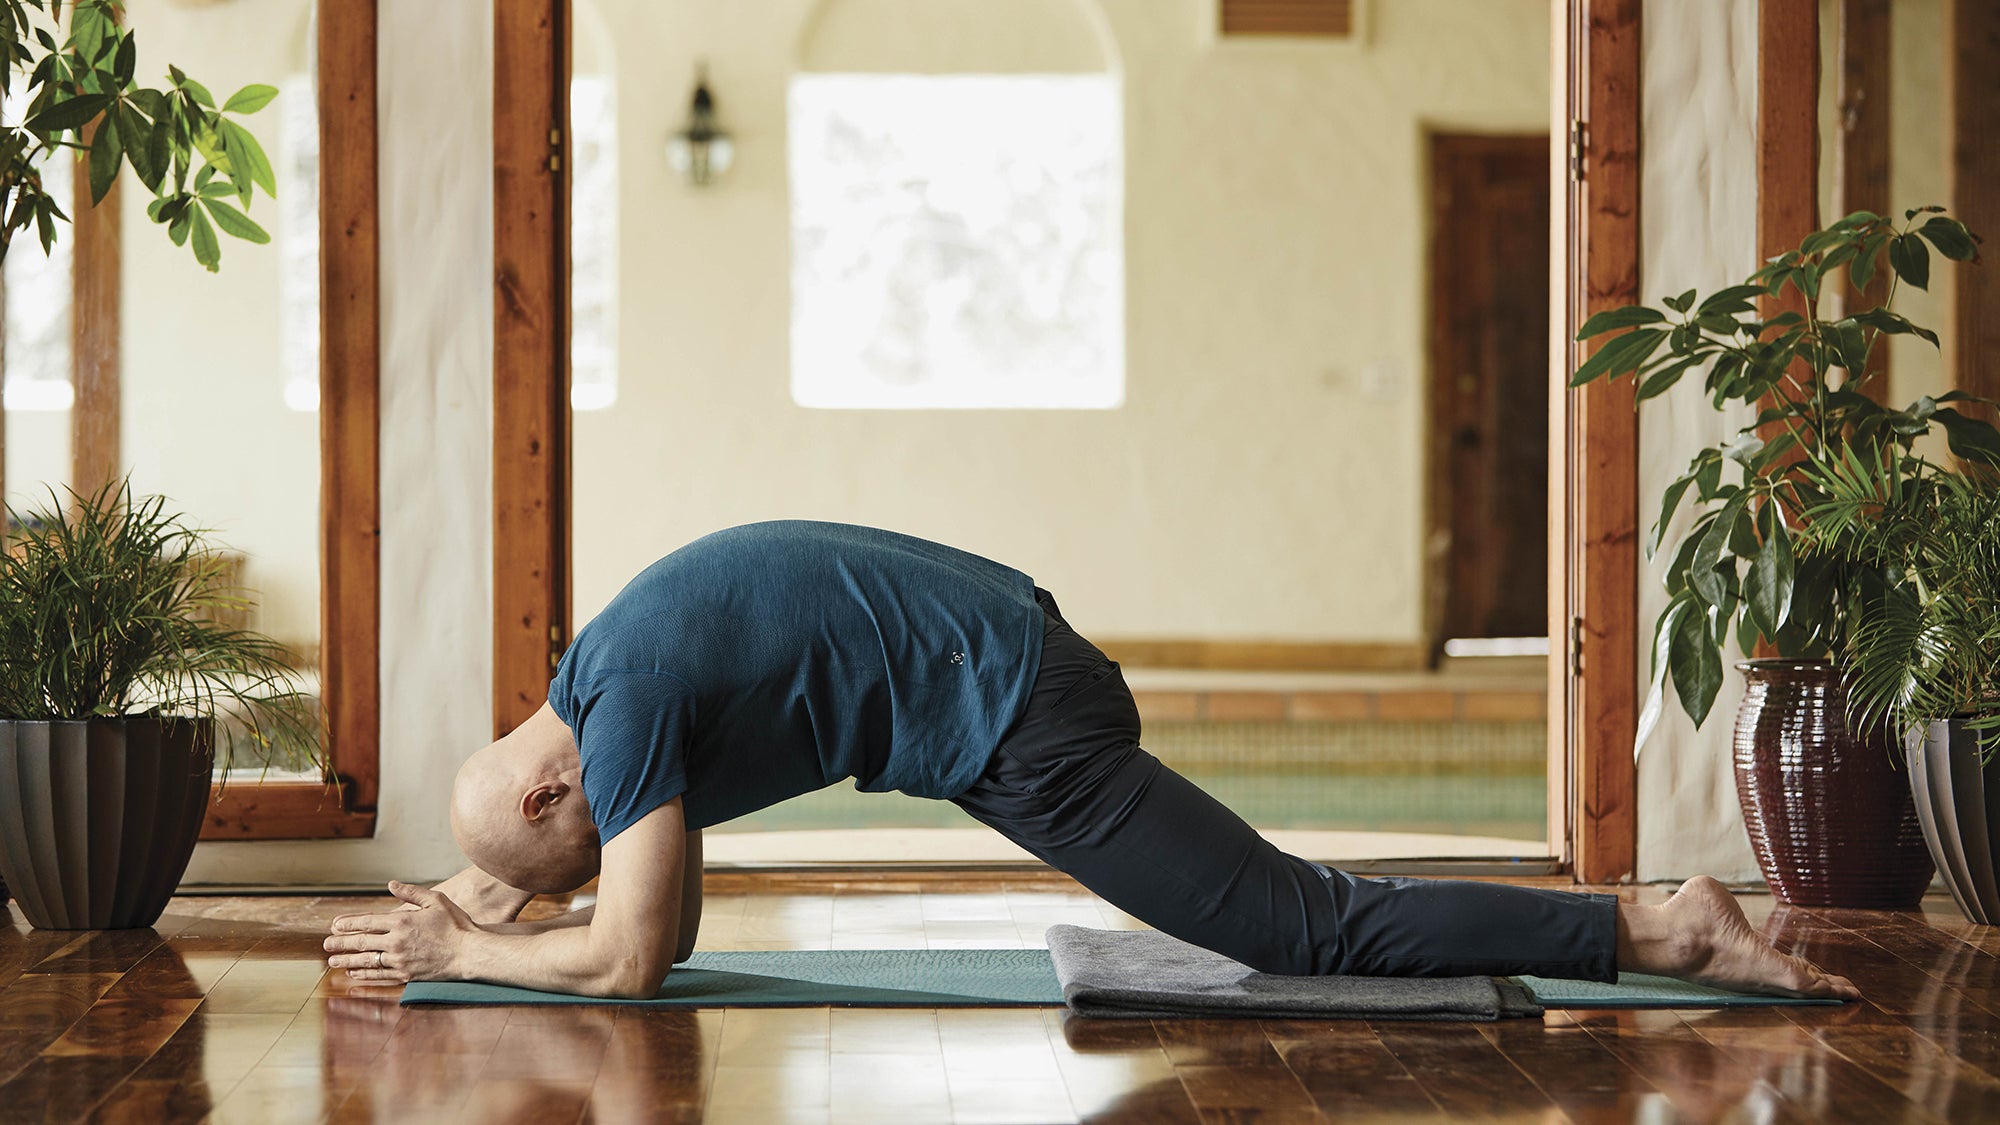 4 Yin Yoga Poses for Shoulders to Relieve Tension